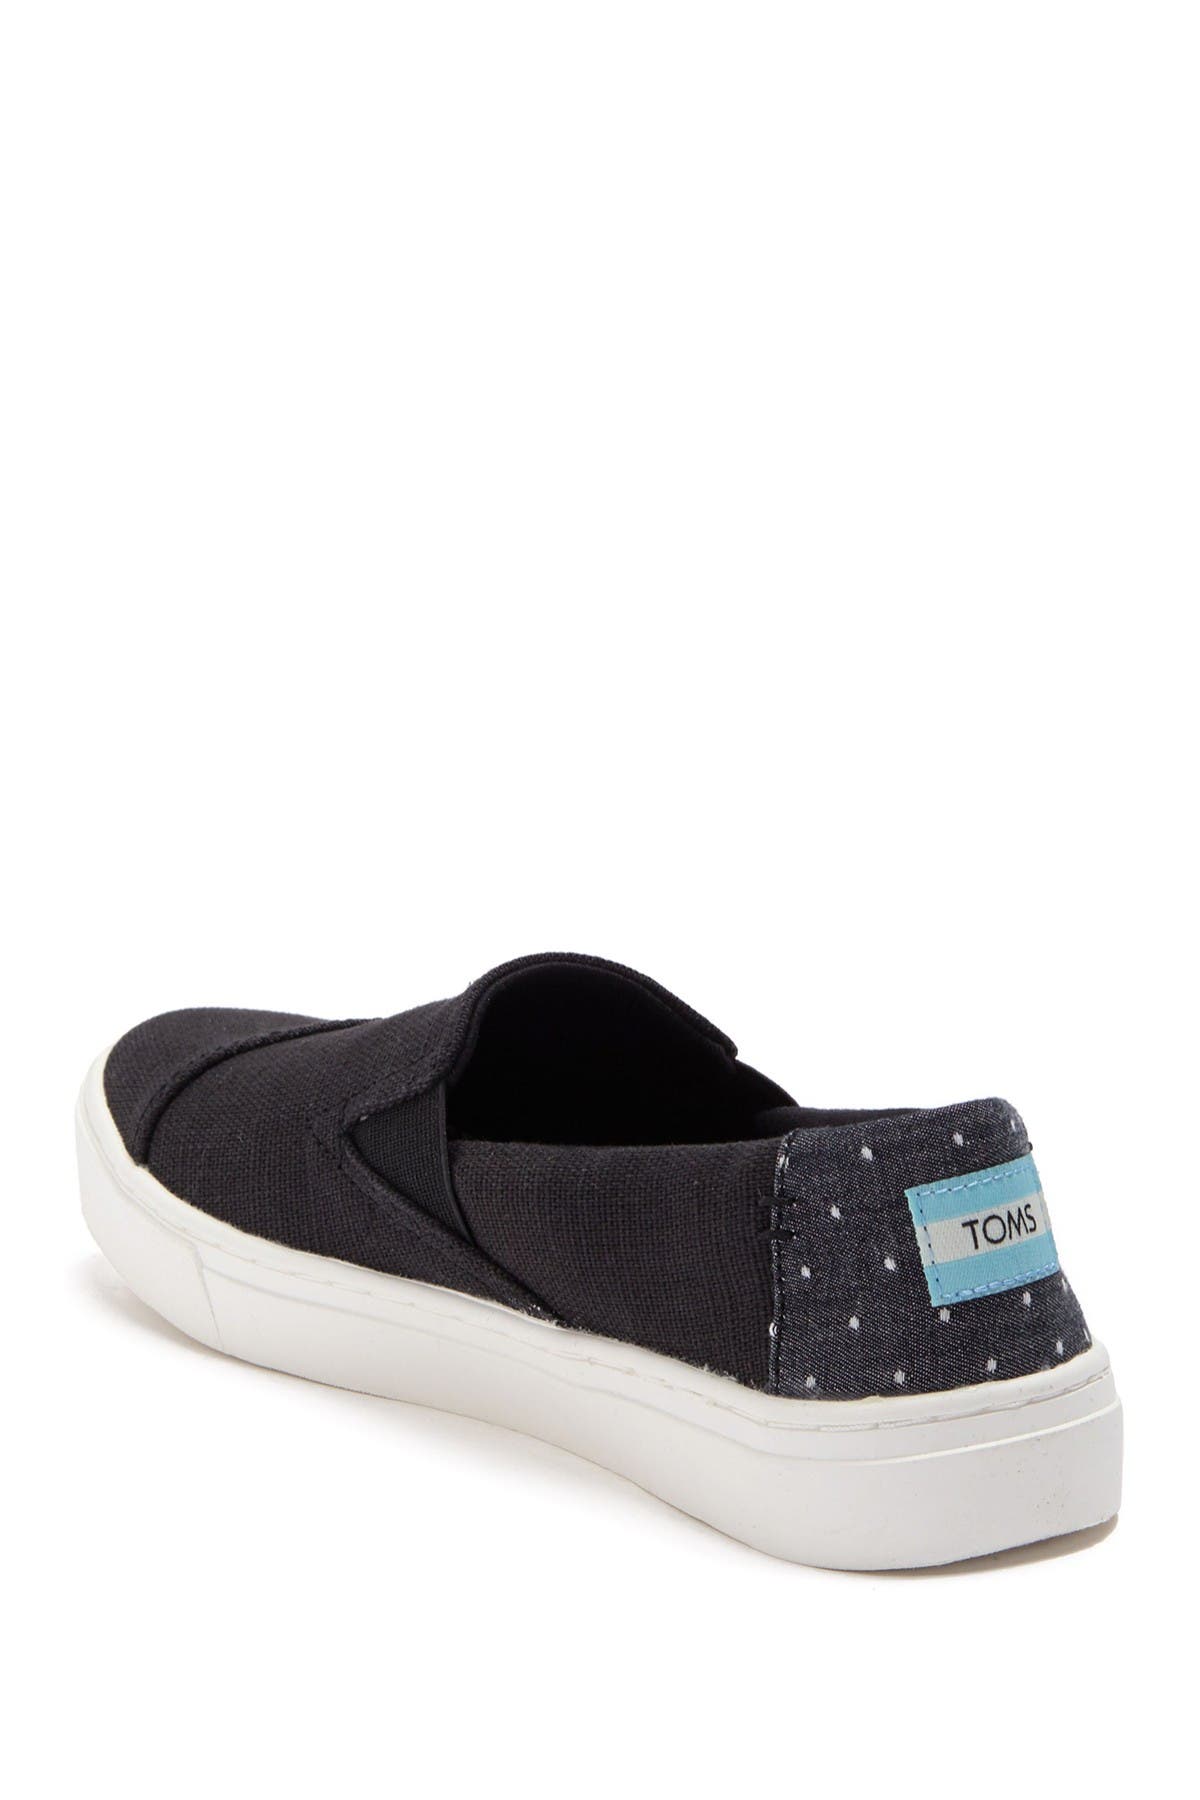 womens toms luca slip on casual shoe